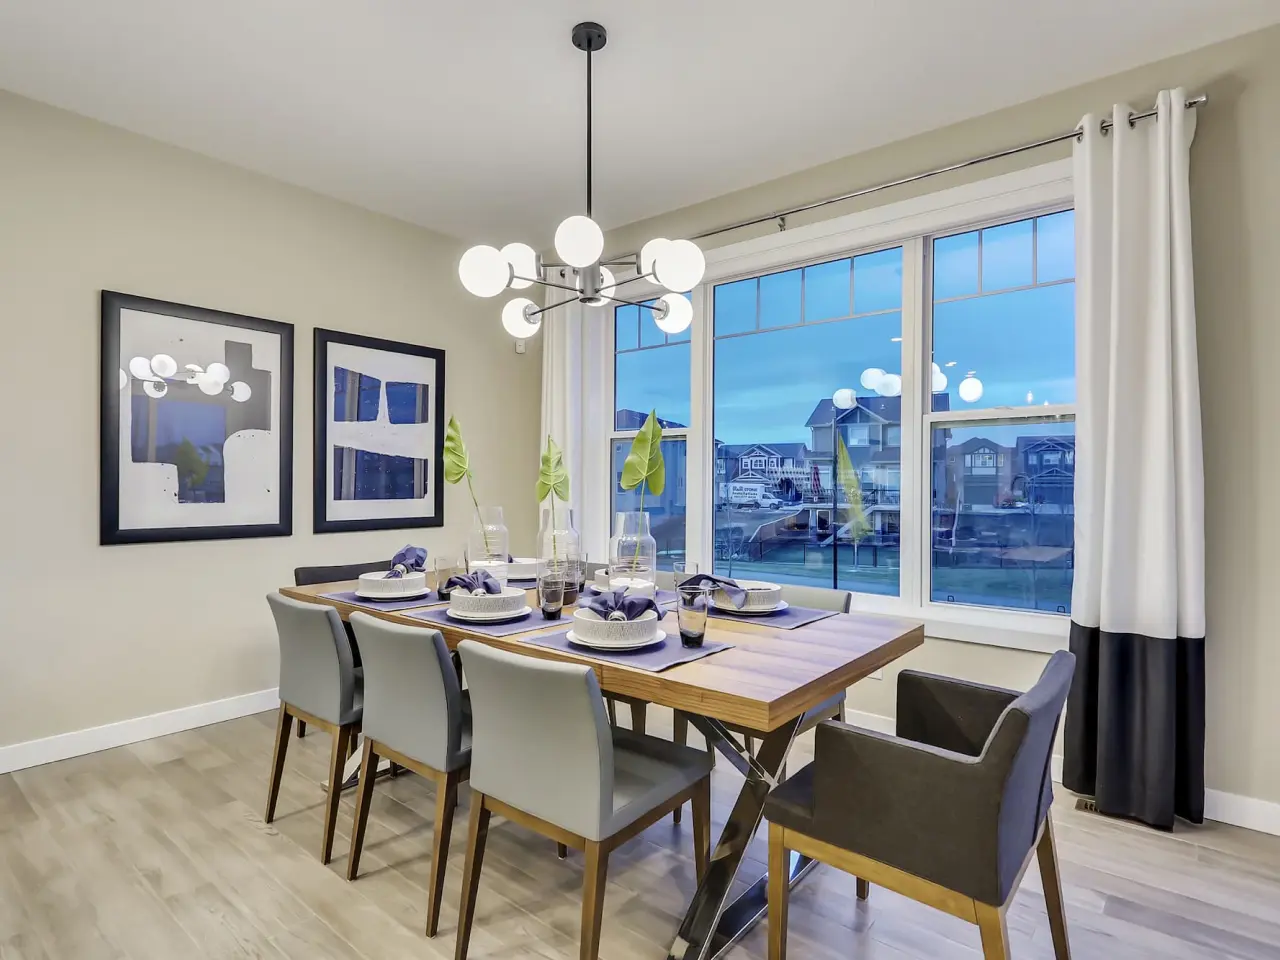 Elegant dining room with a tastefully set table, stylish furniture, and soft ambient lighting, creating a welcoming and sophisticated atmosphere for meals and gatherings.